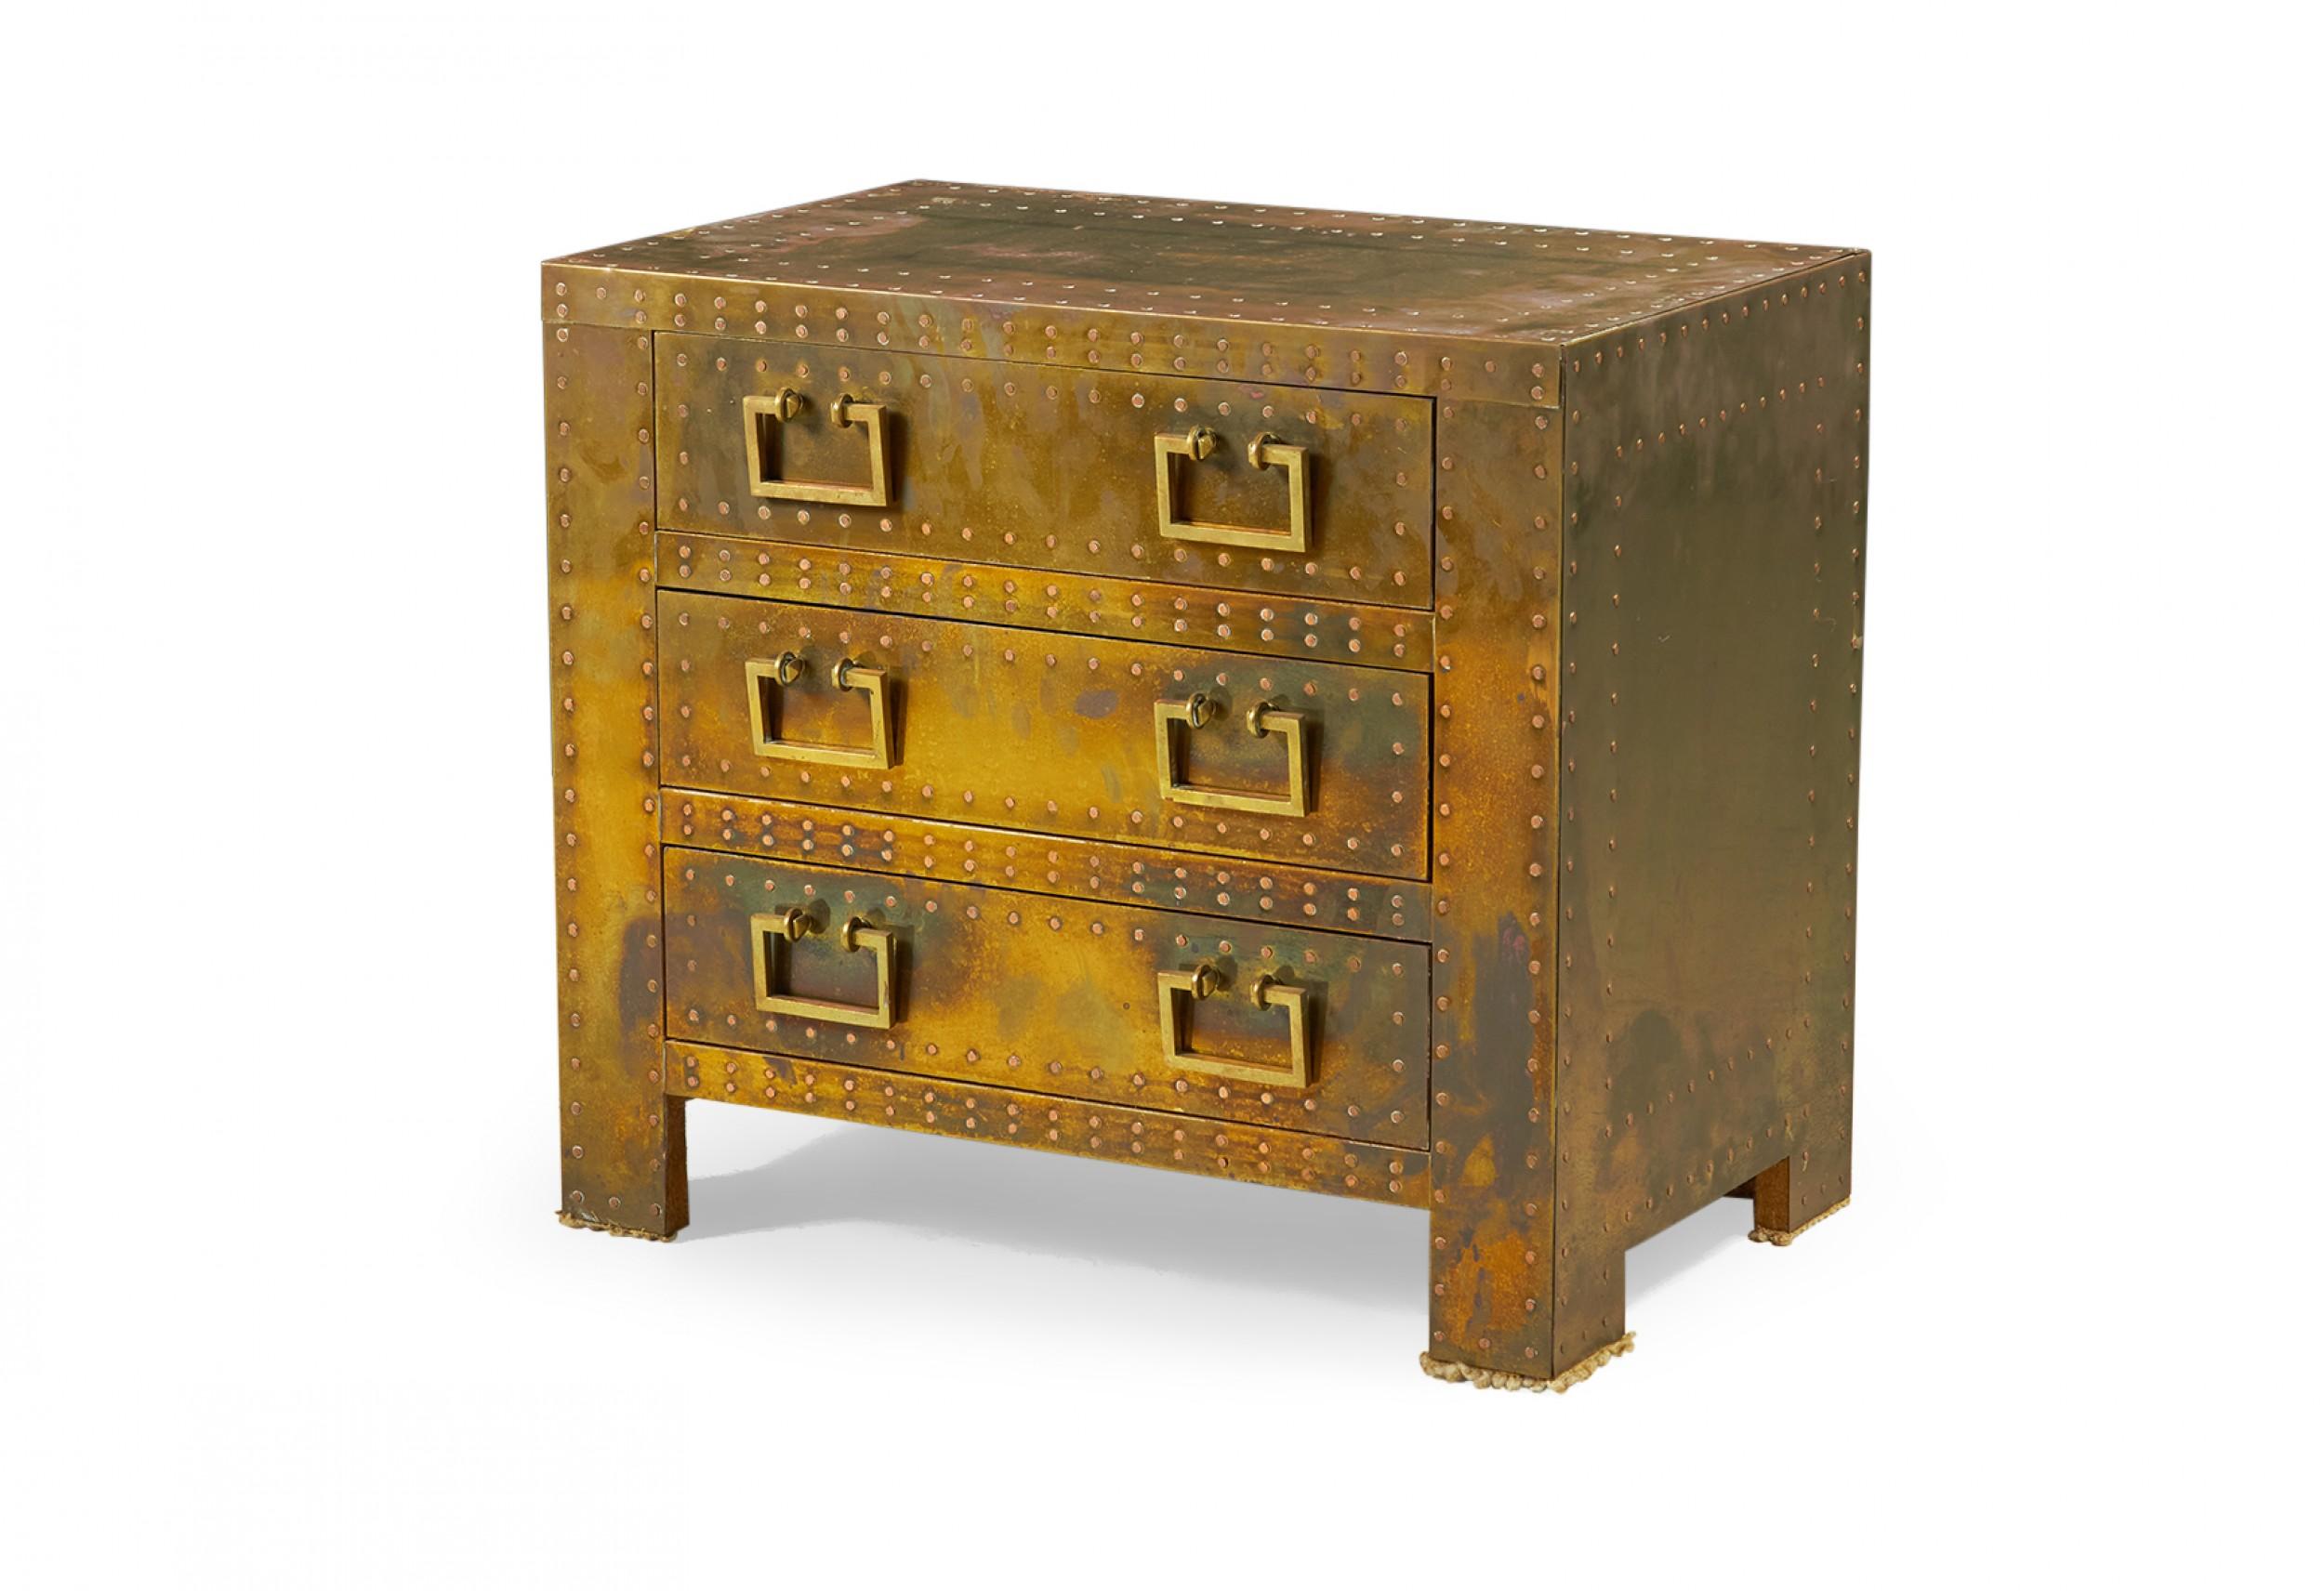 Spanish High Style 'Strongbox' bedside table / commode with brass-clad exterior with natural patina, copper studs, and three drawers with rectangular brass pulls. (SARREID, LTD.)(Similar pieces available with different patinas: DUF0025A-D, similar